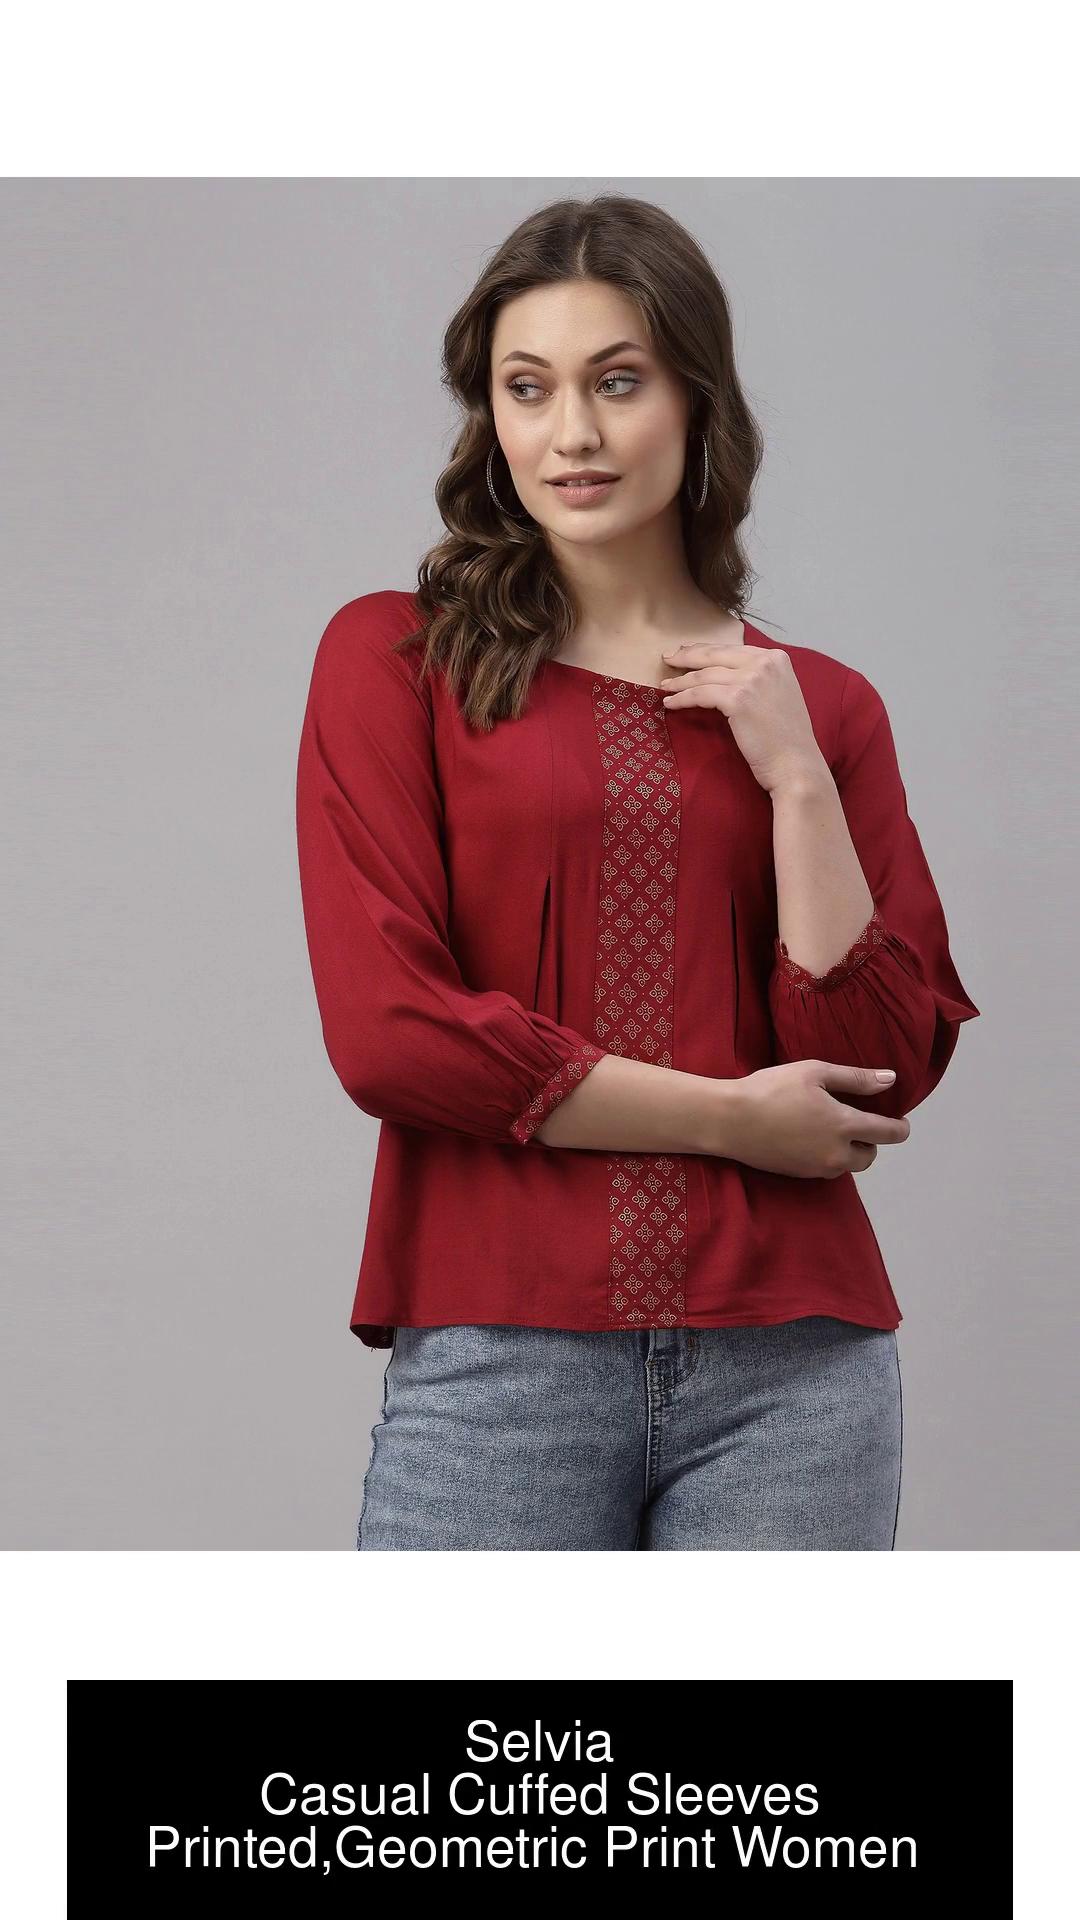 Selvia Casual Printed, Geometric Print Women Red Top - Buy Selvia Casual  Printed, Geometric Print Women Red Top Online at Best Prices in India